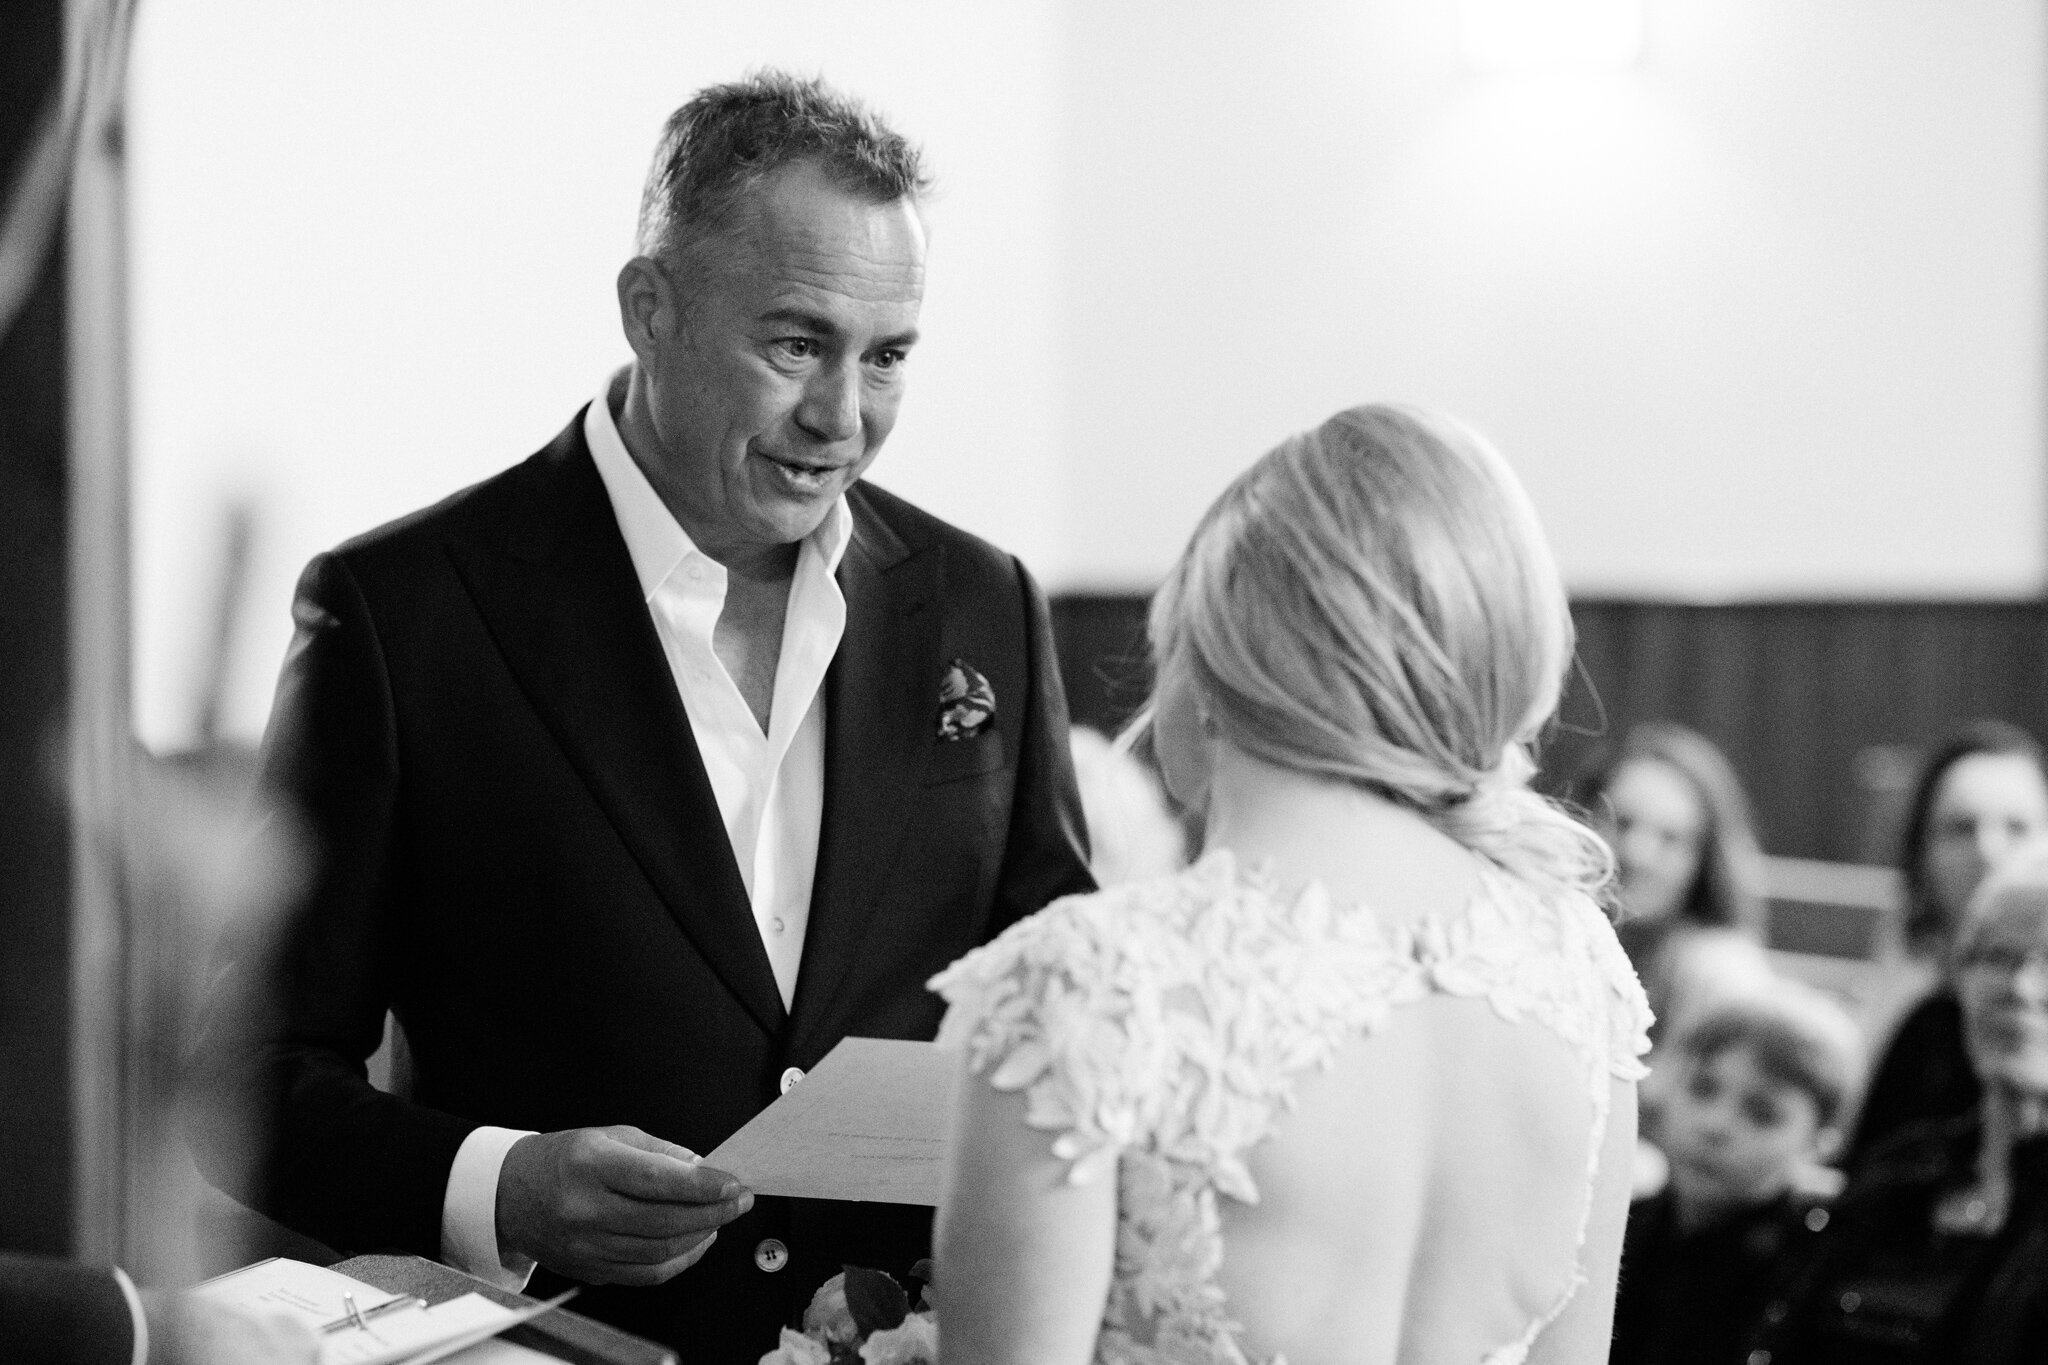 Groom reads his personal vows at intimate winter thornbury weddi